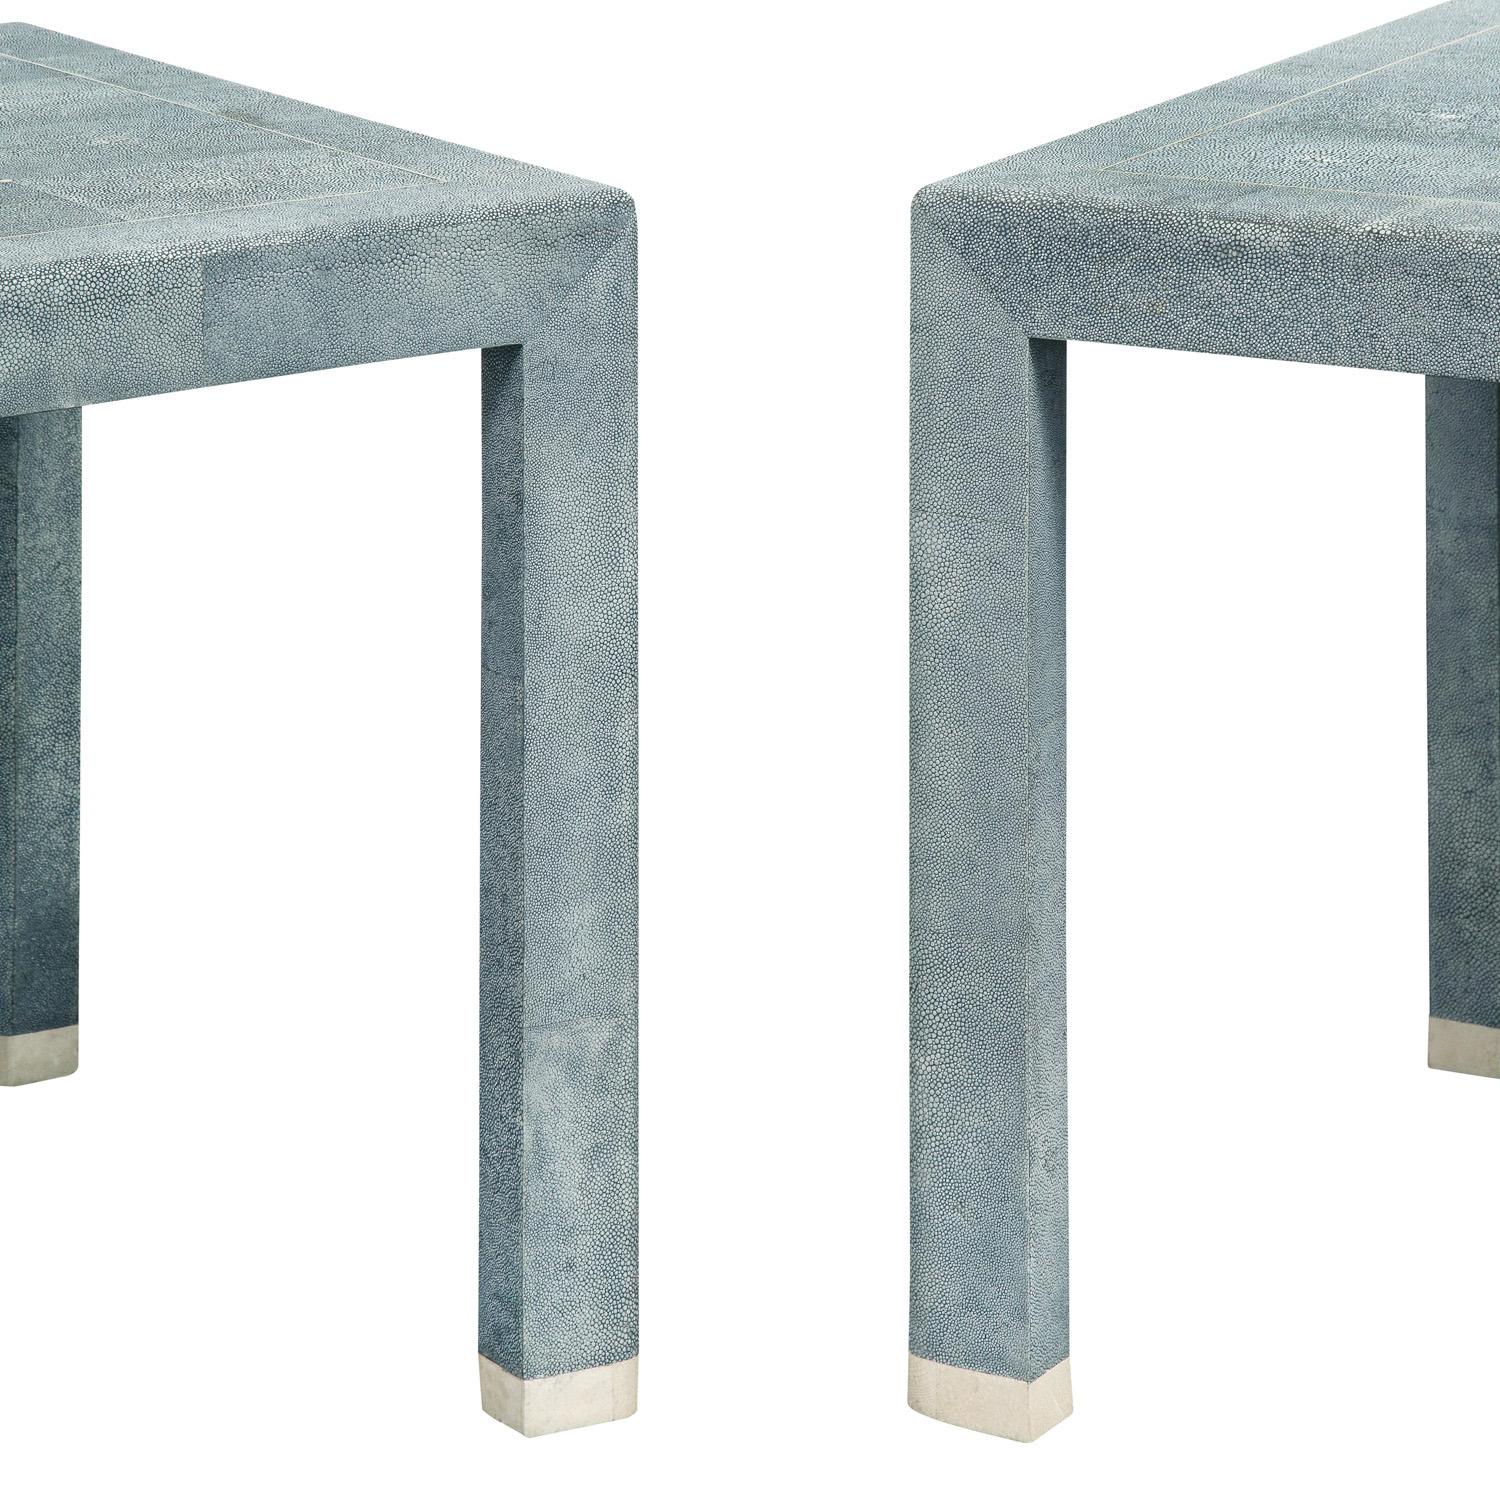 Hand-Crafted Karl Springer End Tables in Shagreen with Bone Inlays 1980s 'Signed'